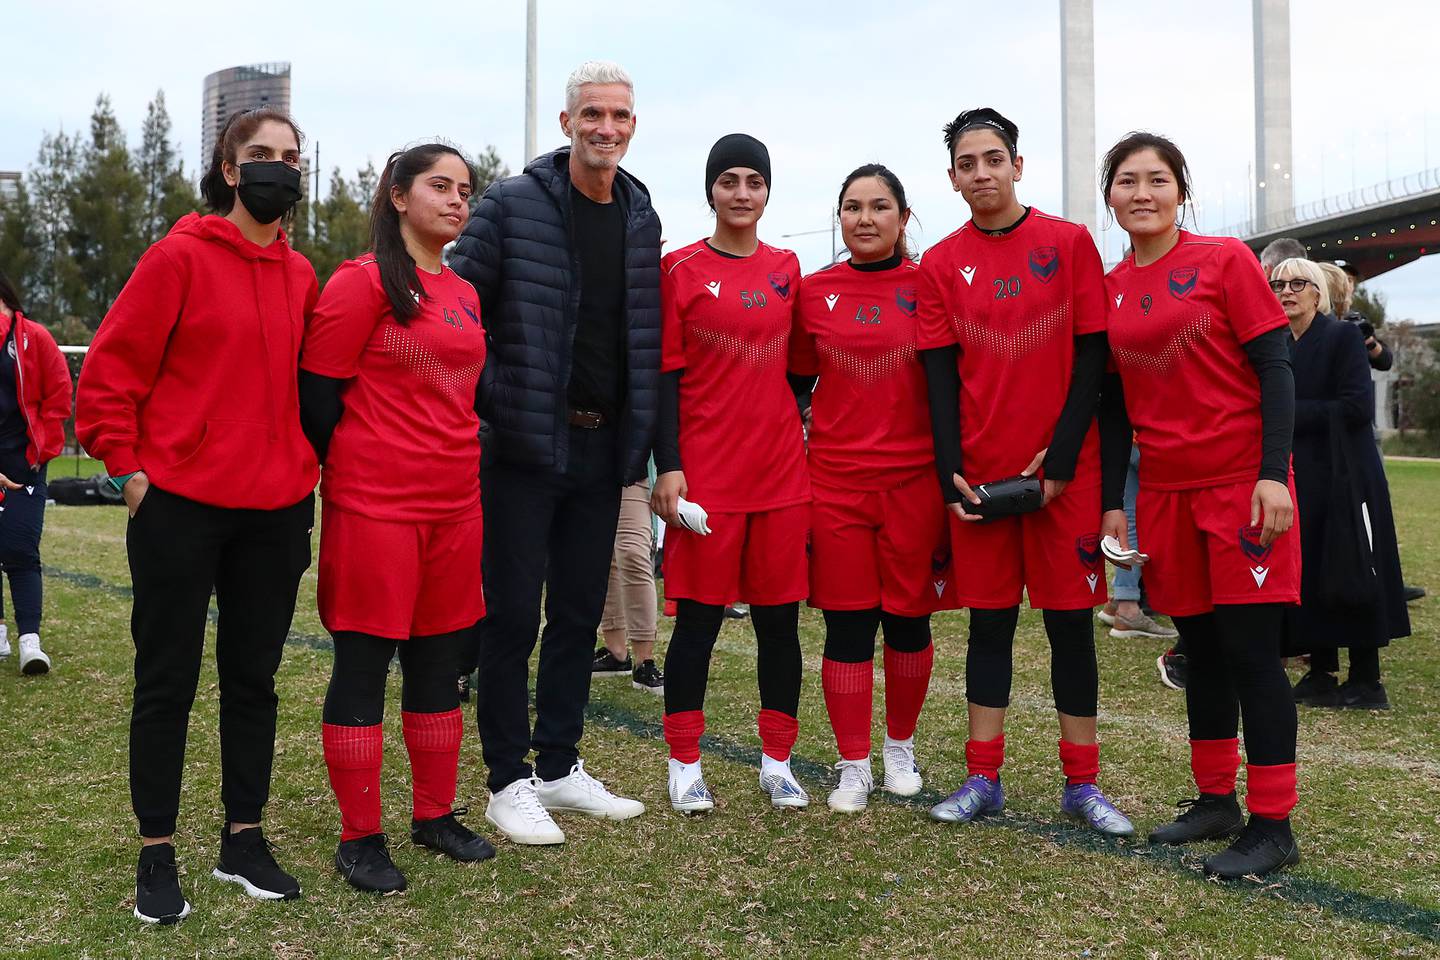 Melbourne Victory Afghan Women's Team with Craig Foster on May 1. Getty